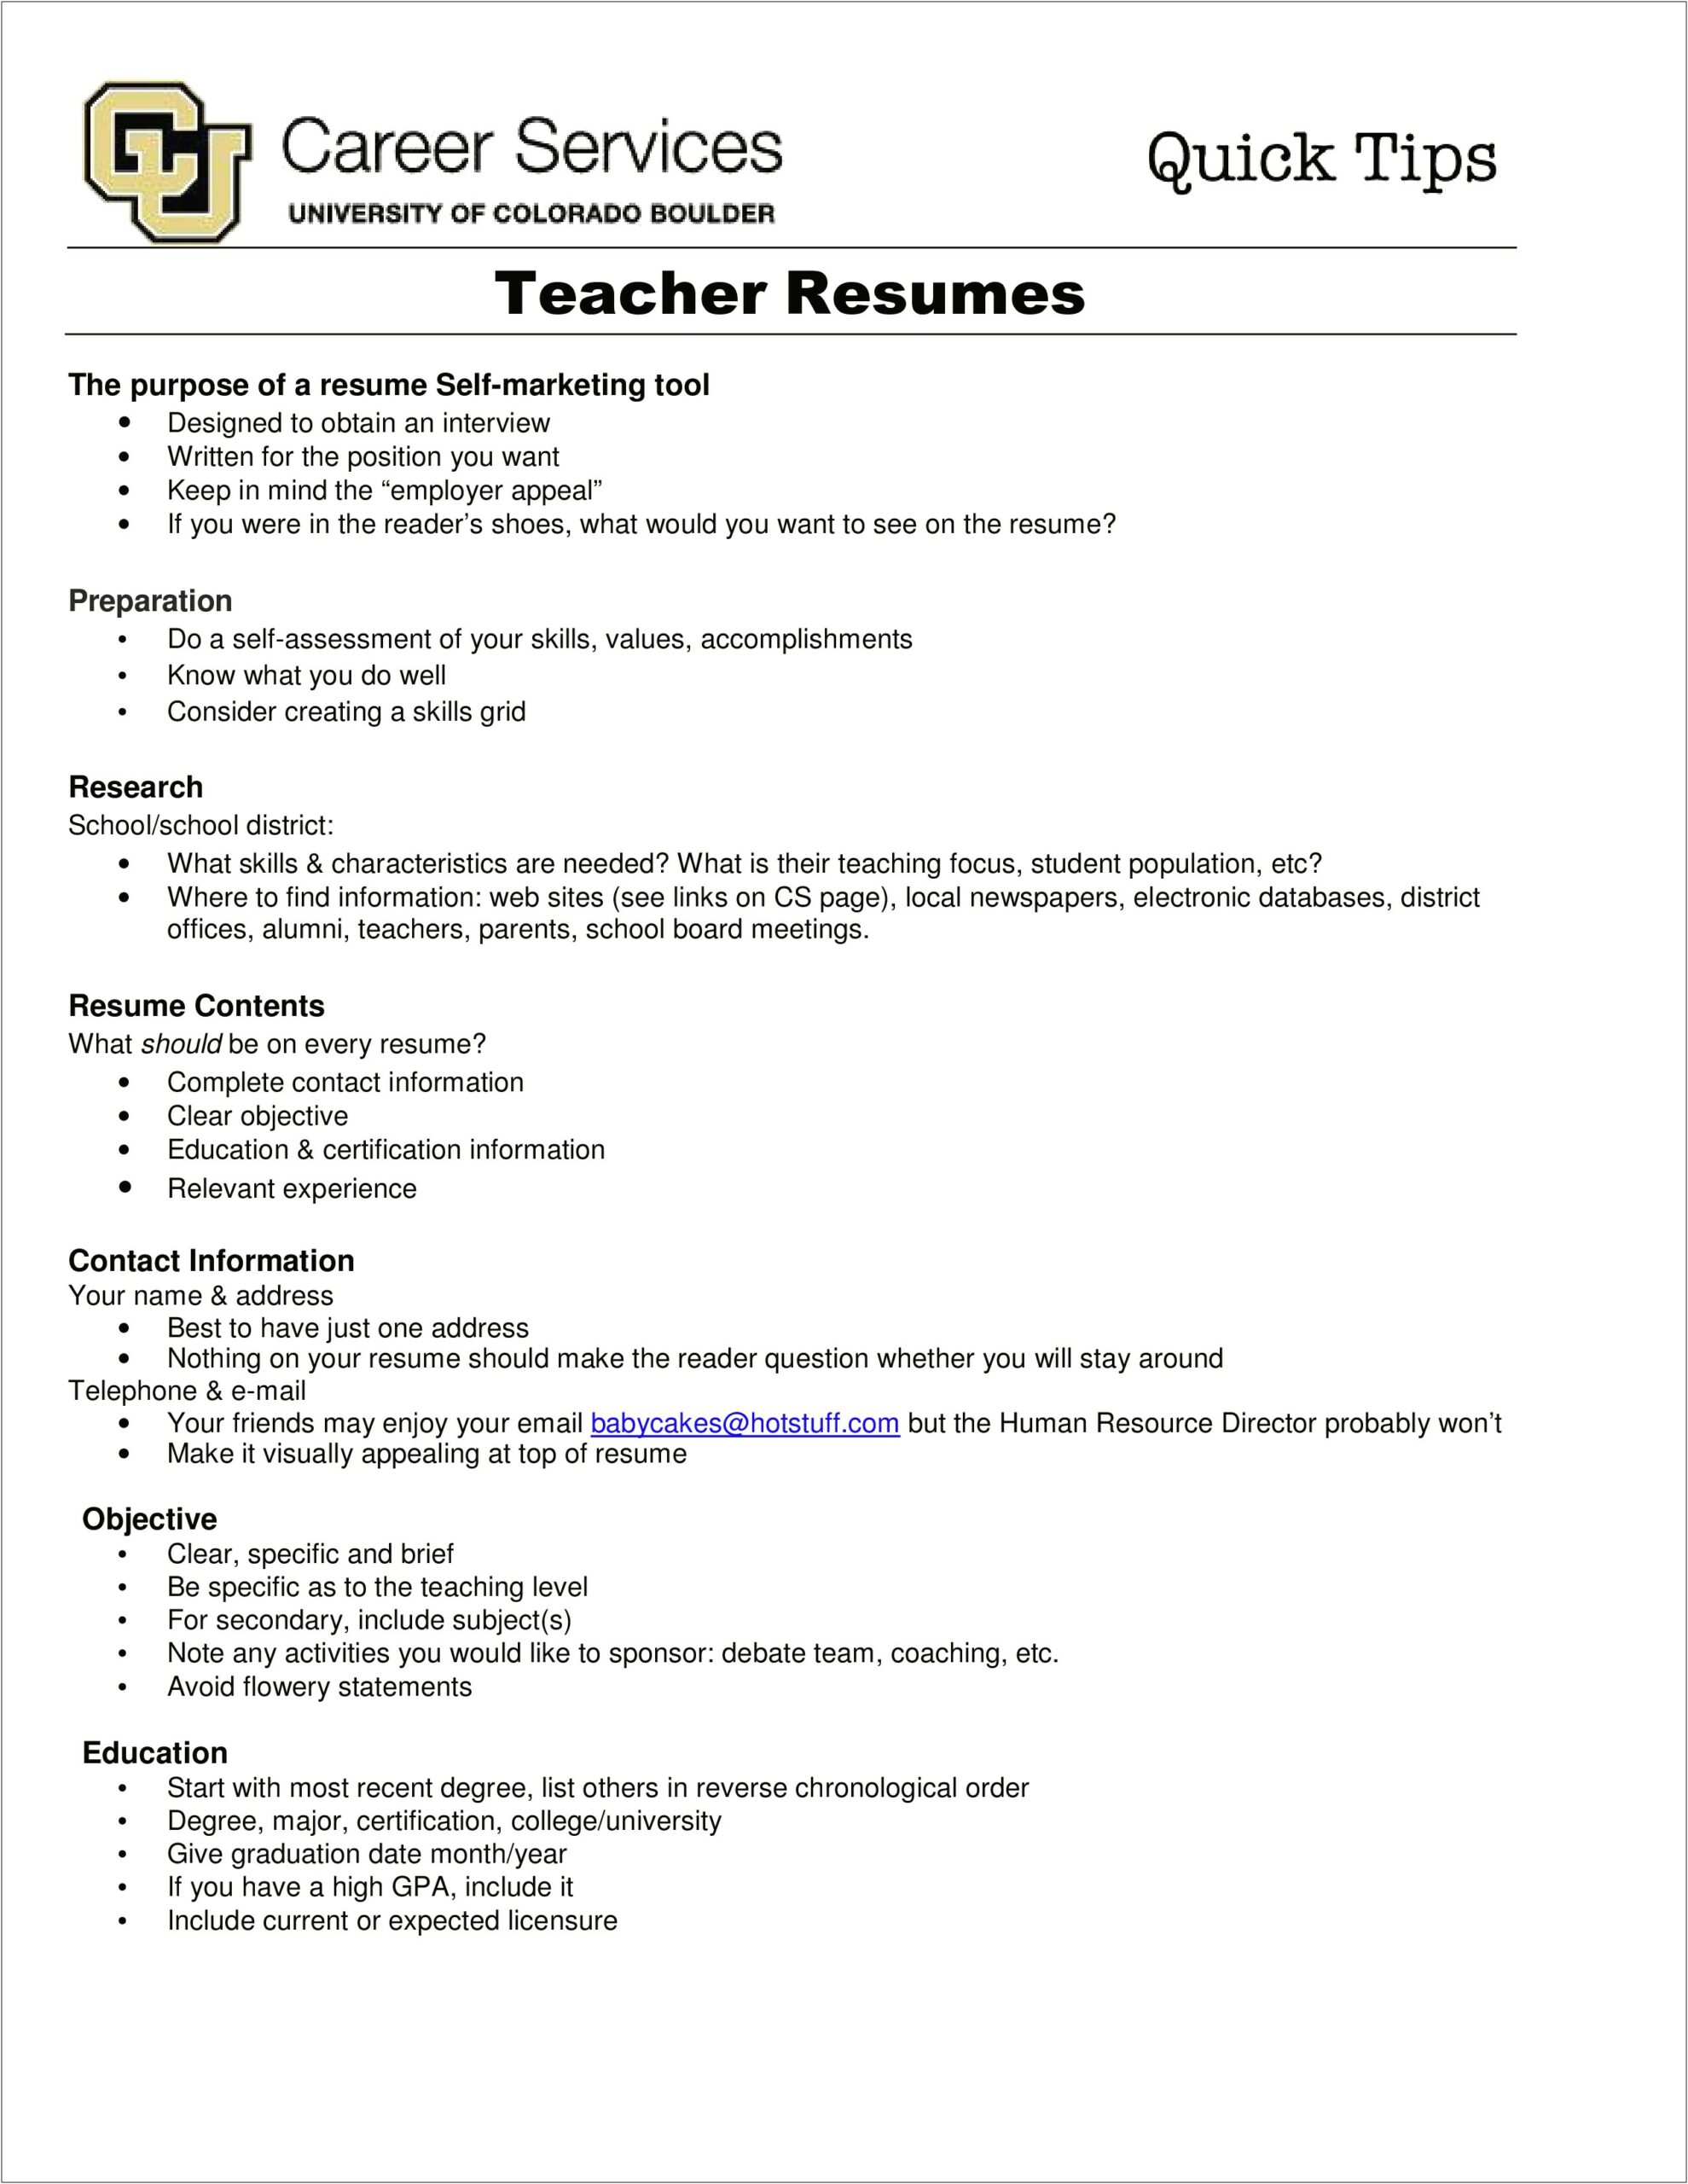 Can School Be Considered Relevant Experience On Resume